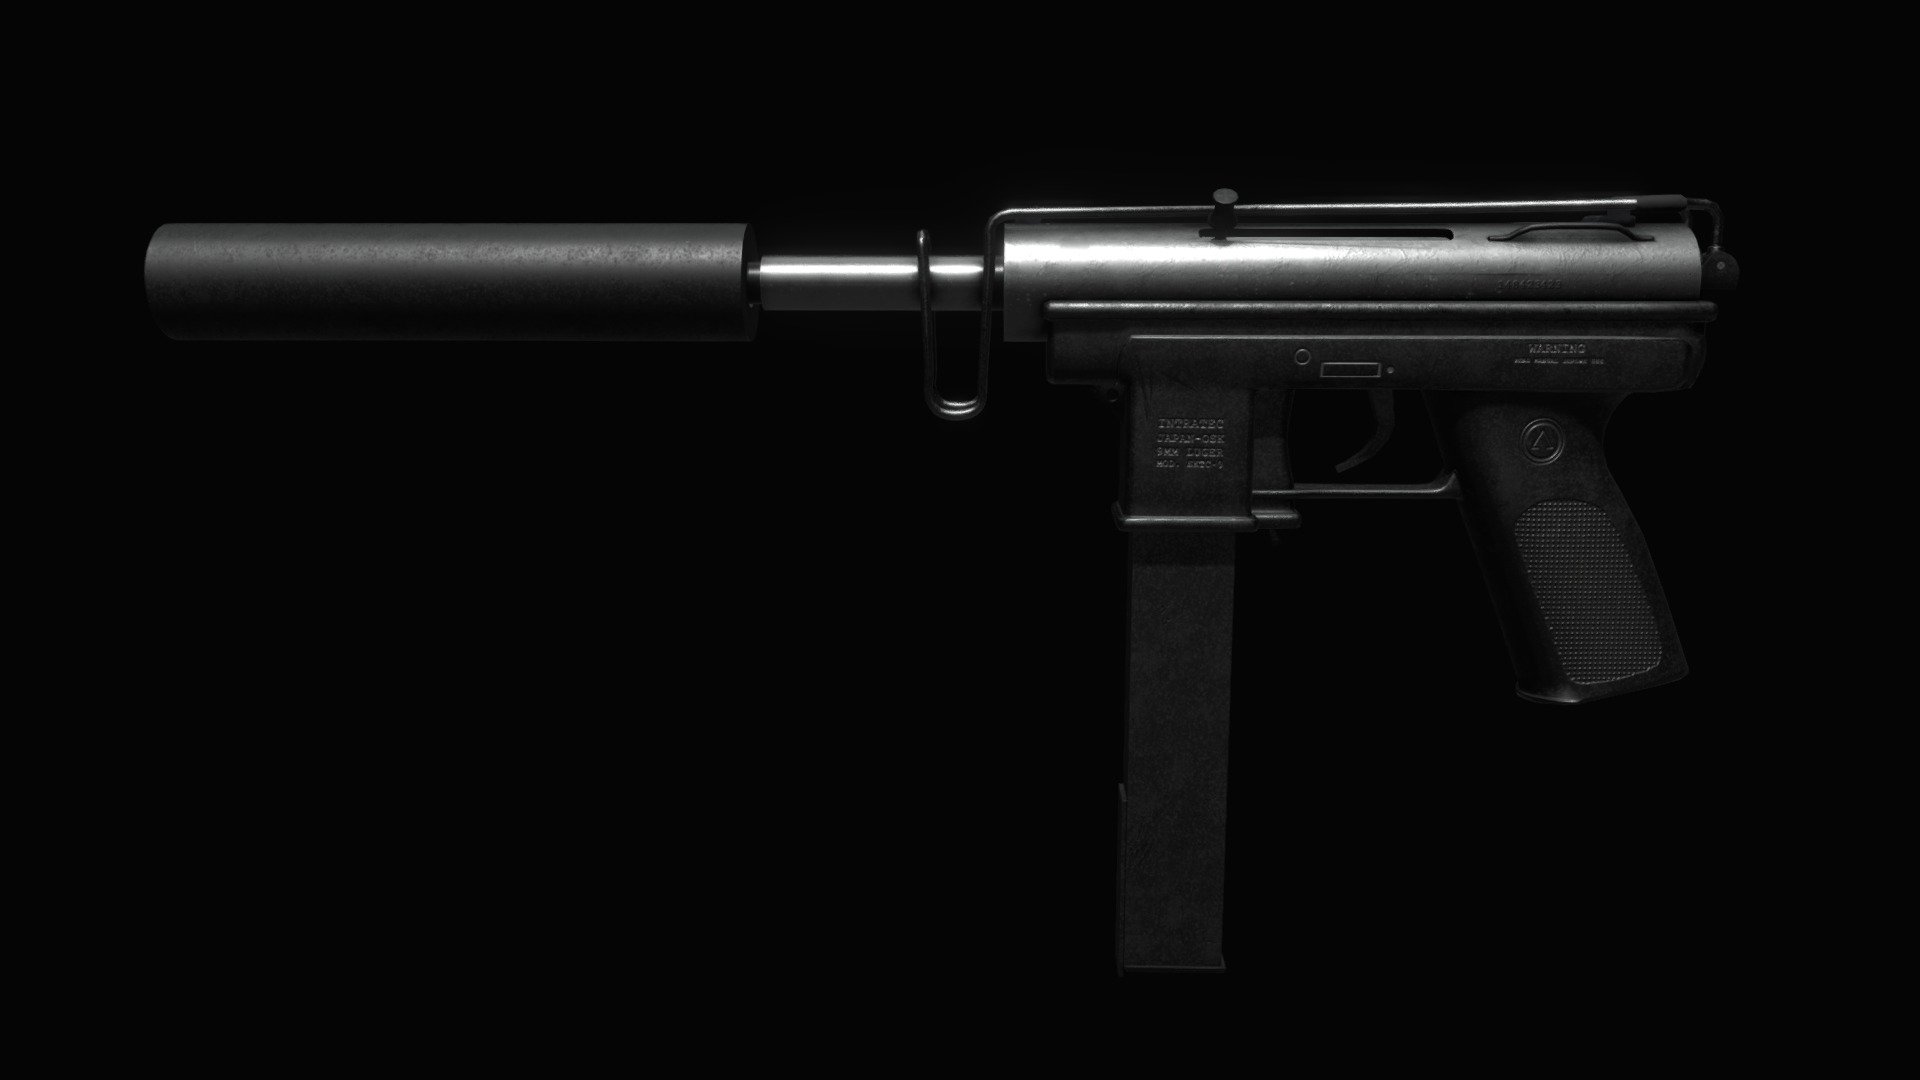 Messing around in Substance + Blender
The weapon is a mix of two existent weapons, Skorpion and a Tec 9 3d model